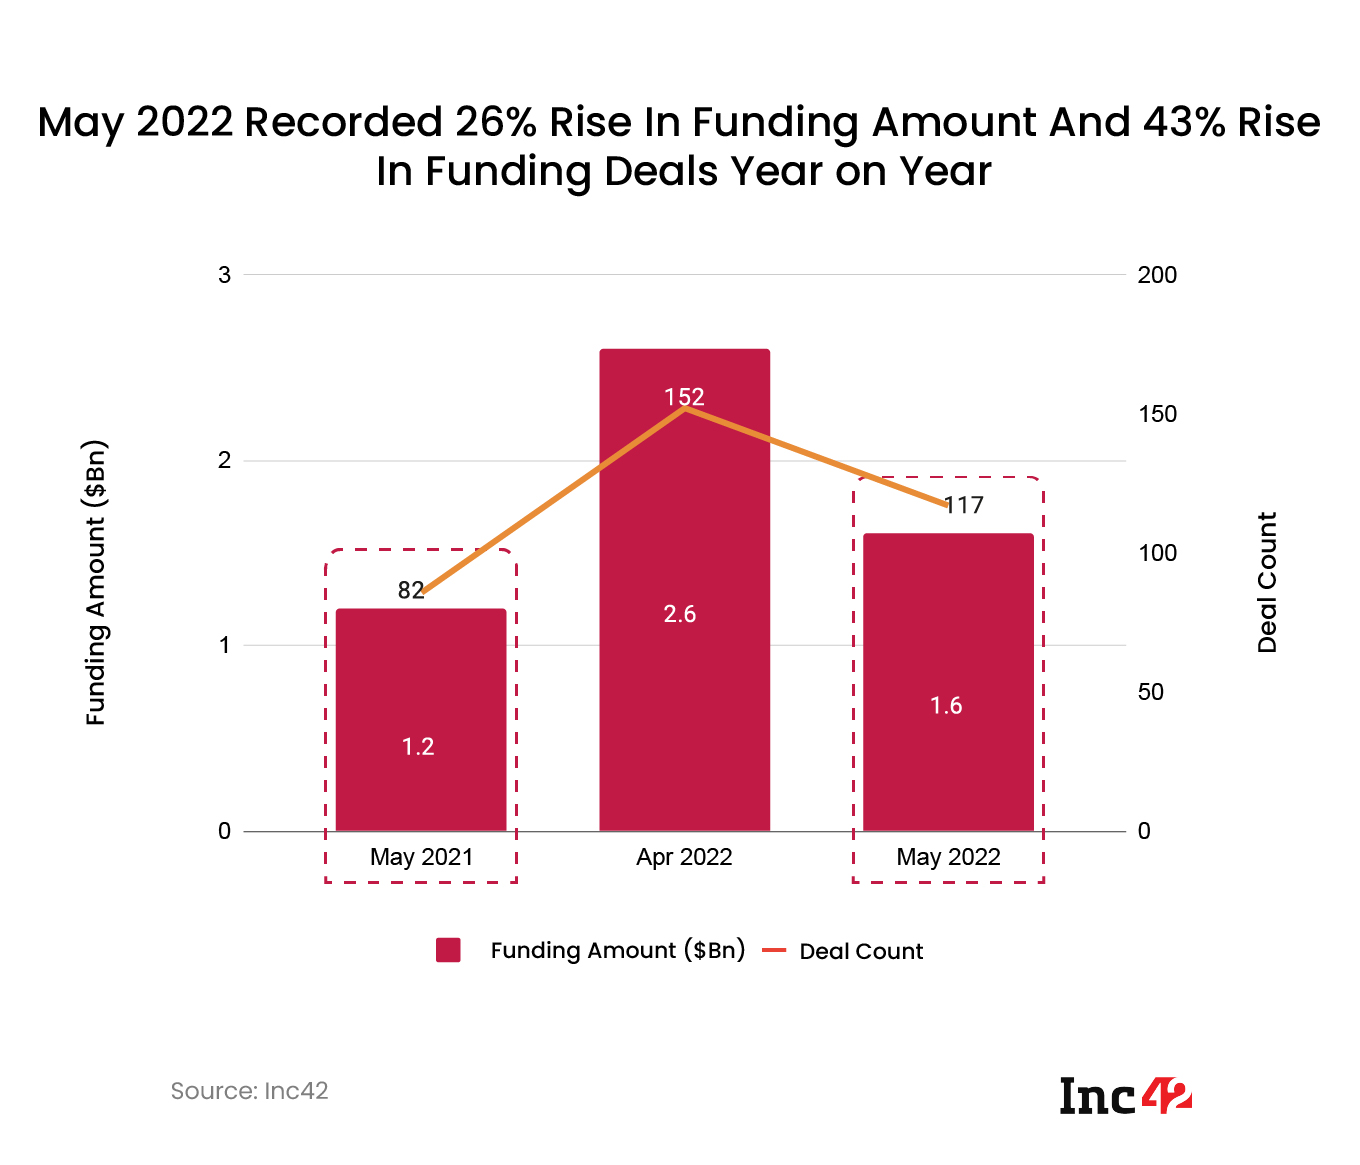 May 2022 saw a rise in both funding deals and funding amount as compared to May 2021